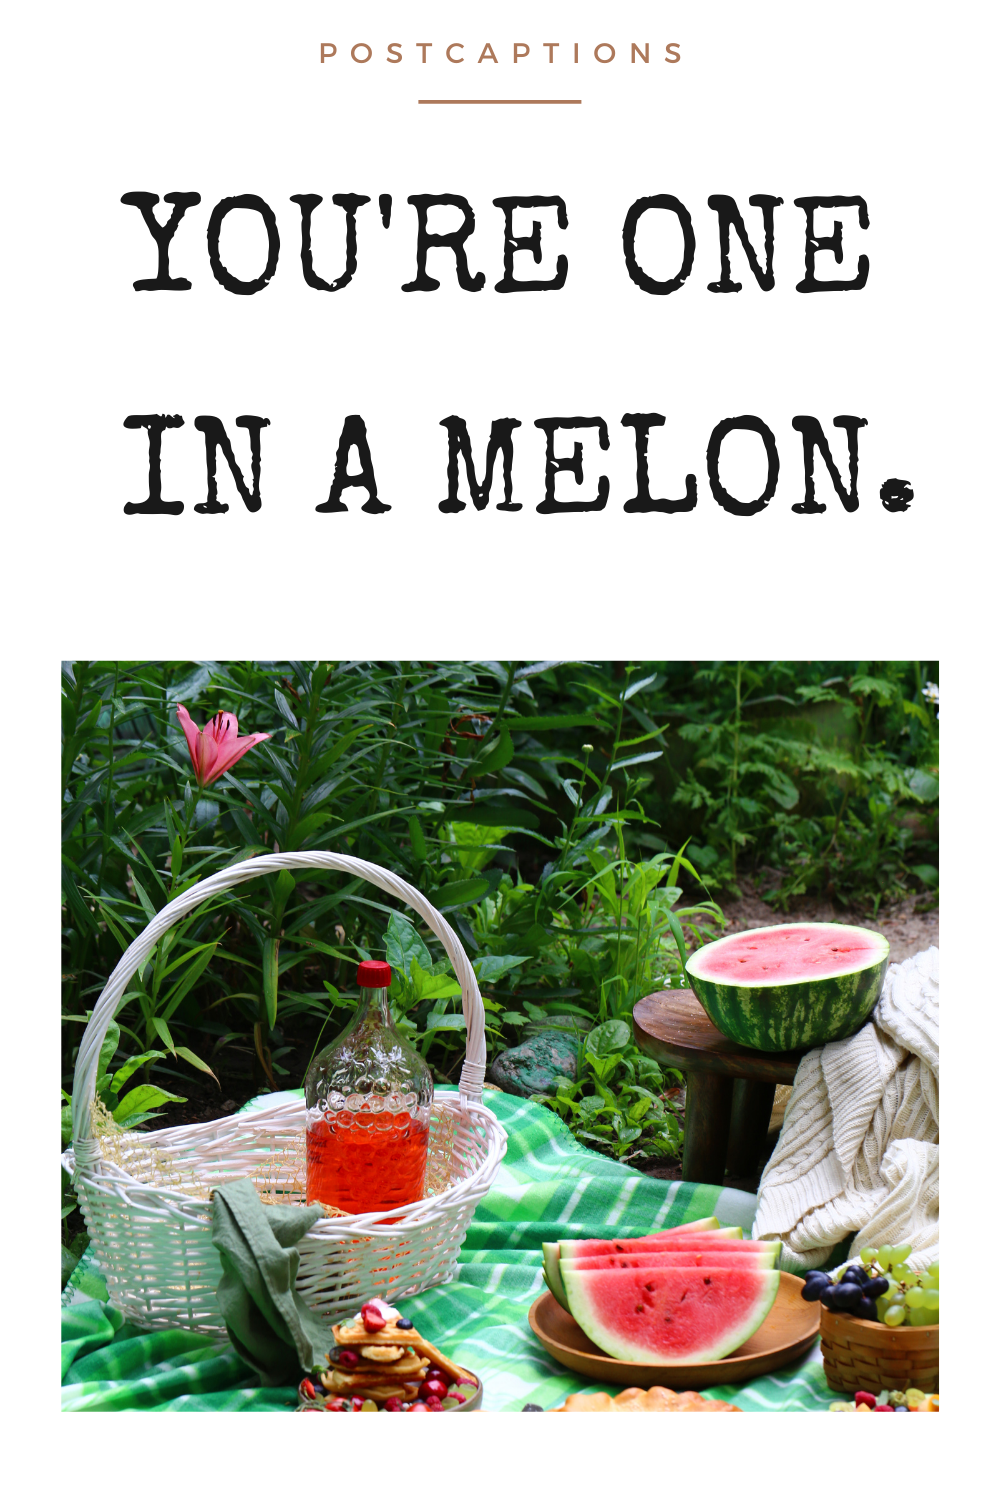 75 Watermelon Captions for Instagram 